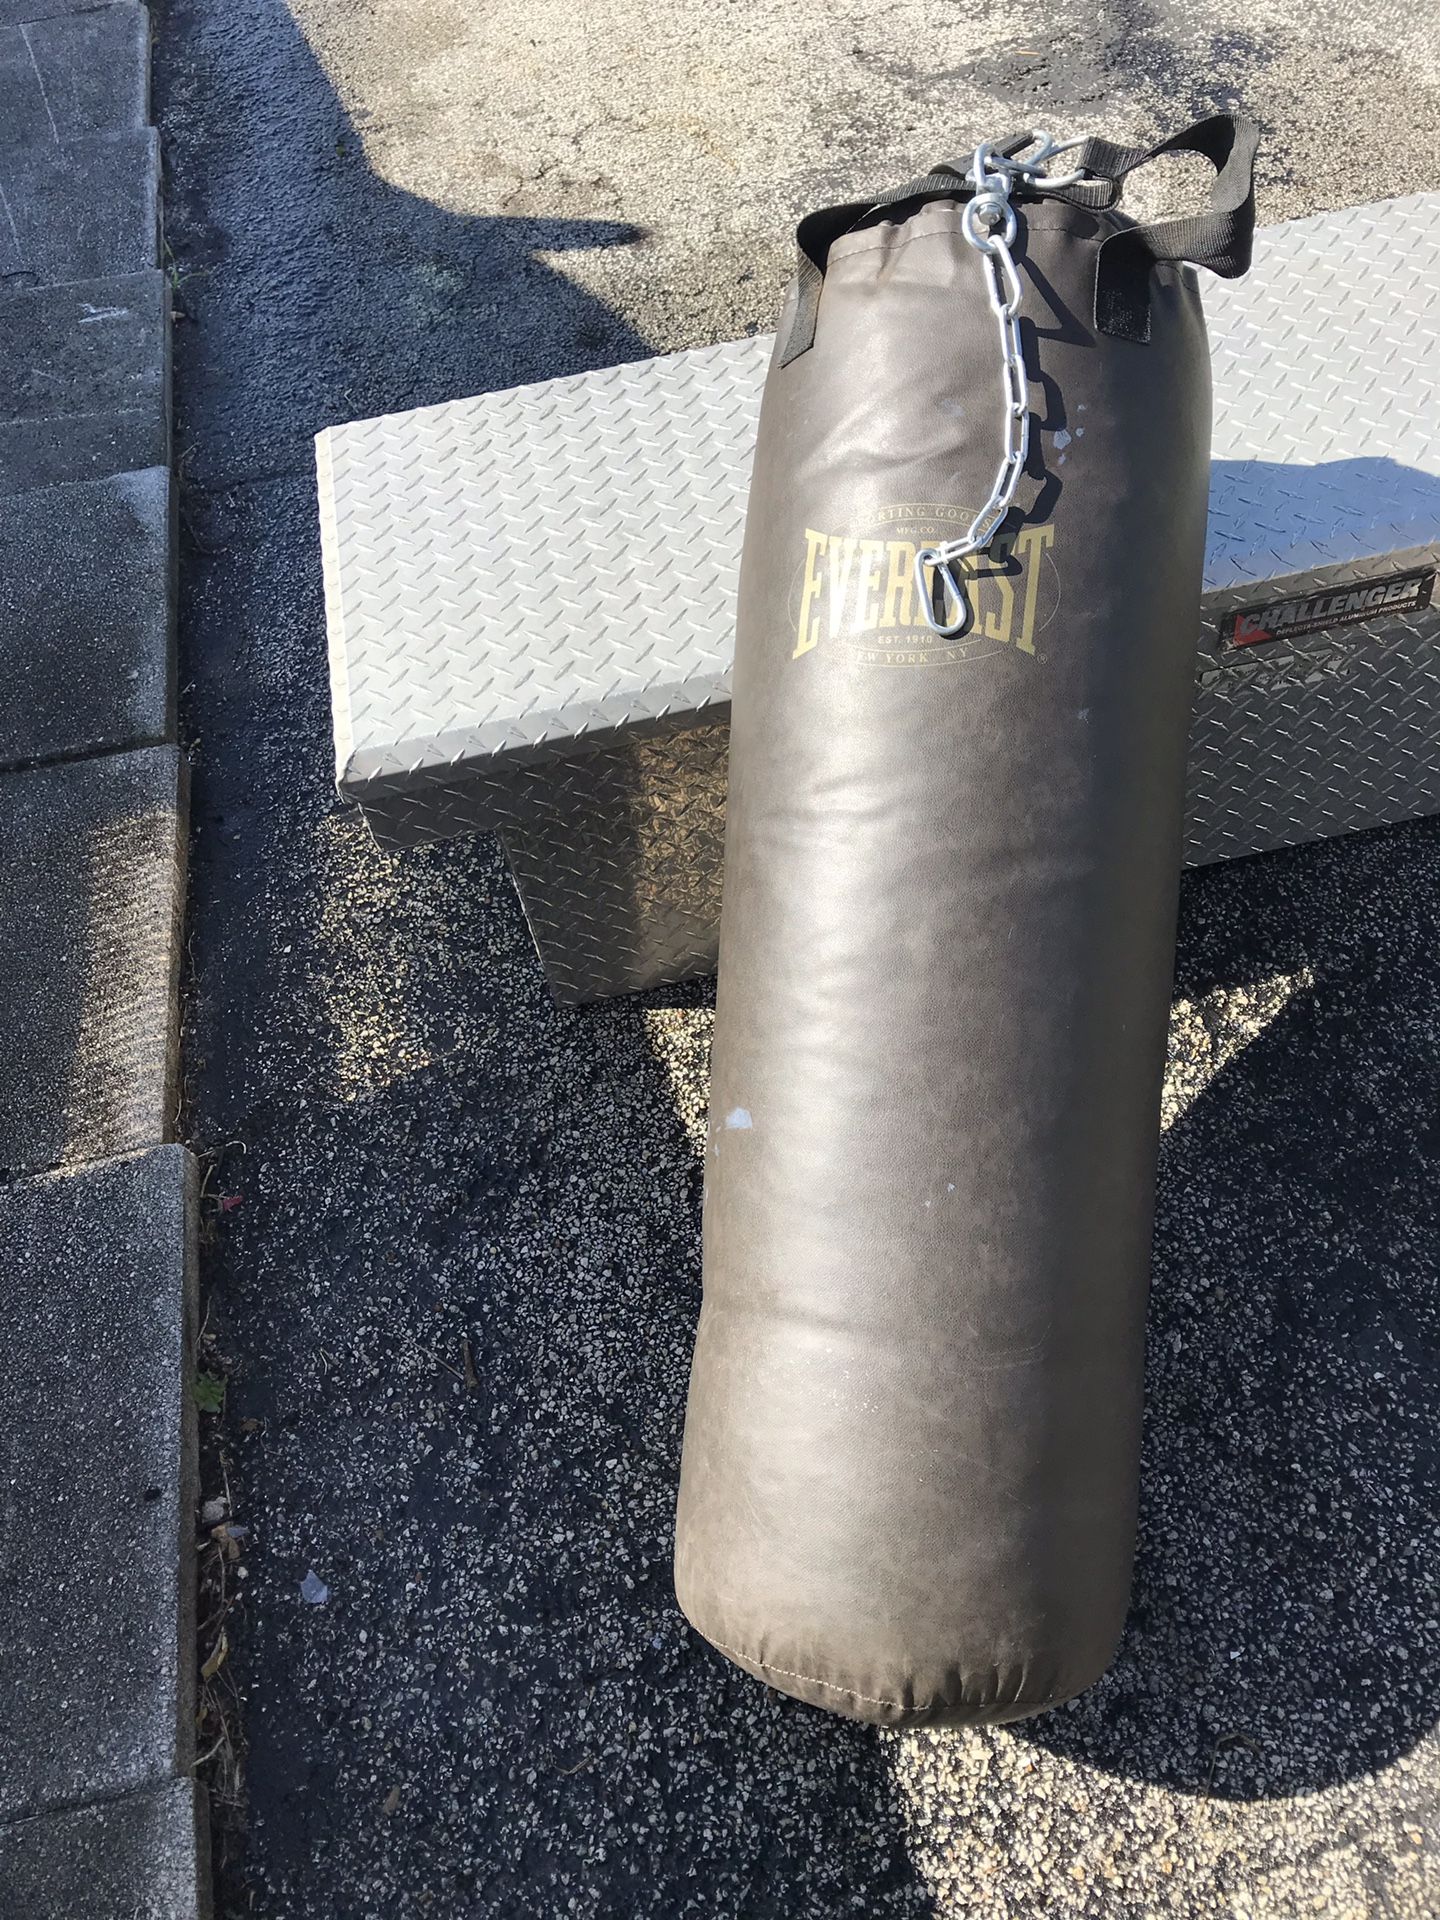 Everlast 70Lb punching bag with roof mount